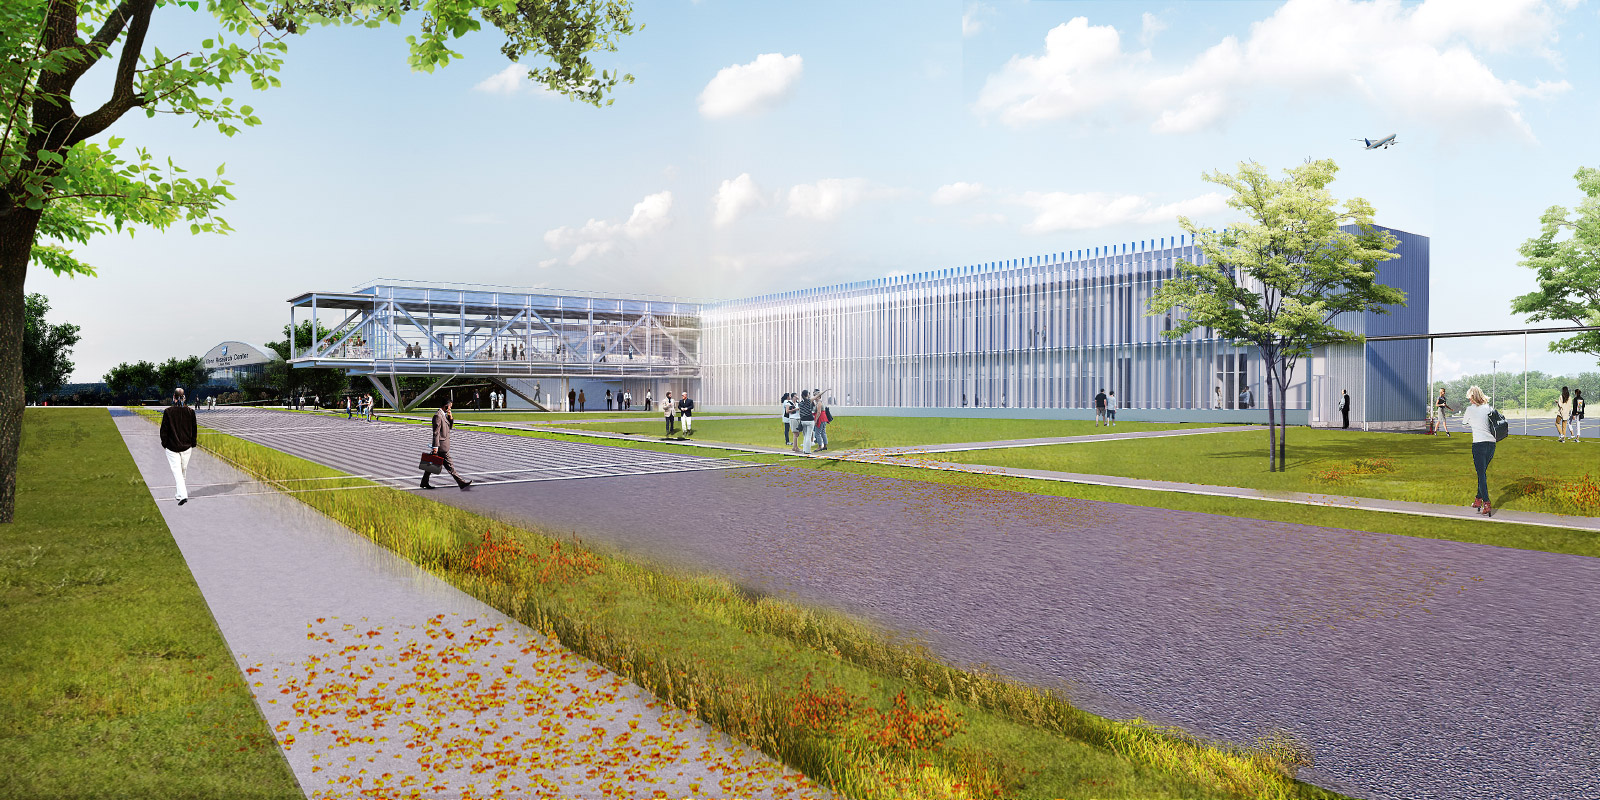 Rendering of the Research Support Building, a forthcoming addition to the John H. Glenn Research Center in Cleveland, Ohio, designed by TEN Arquitectos